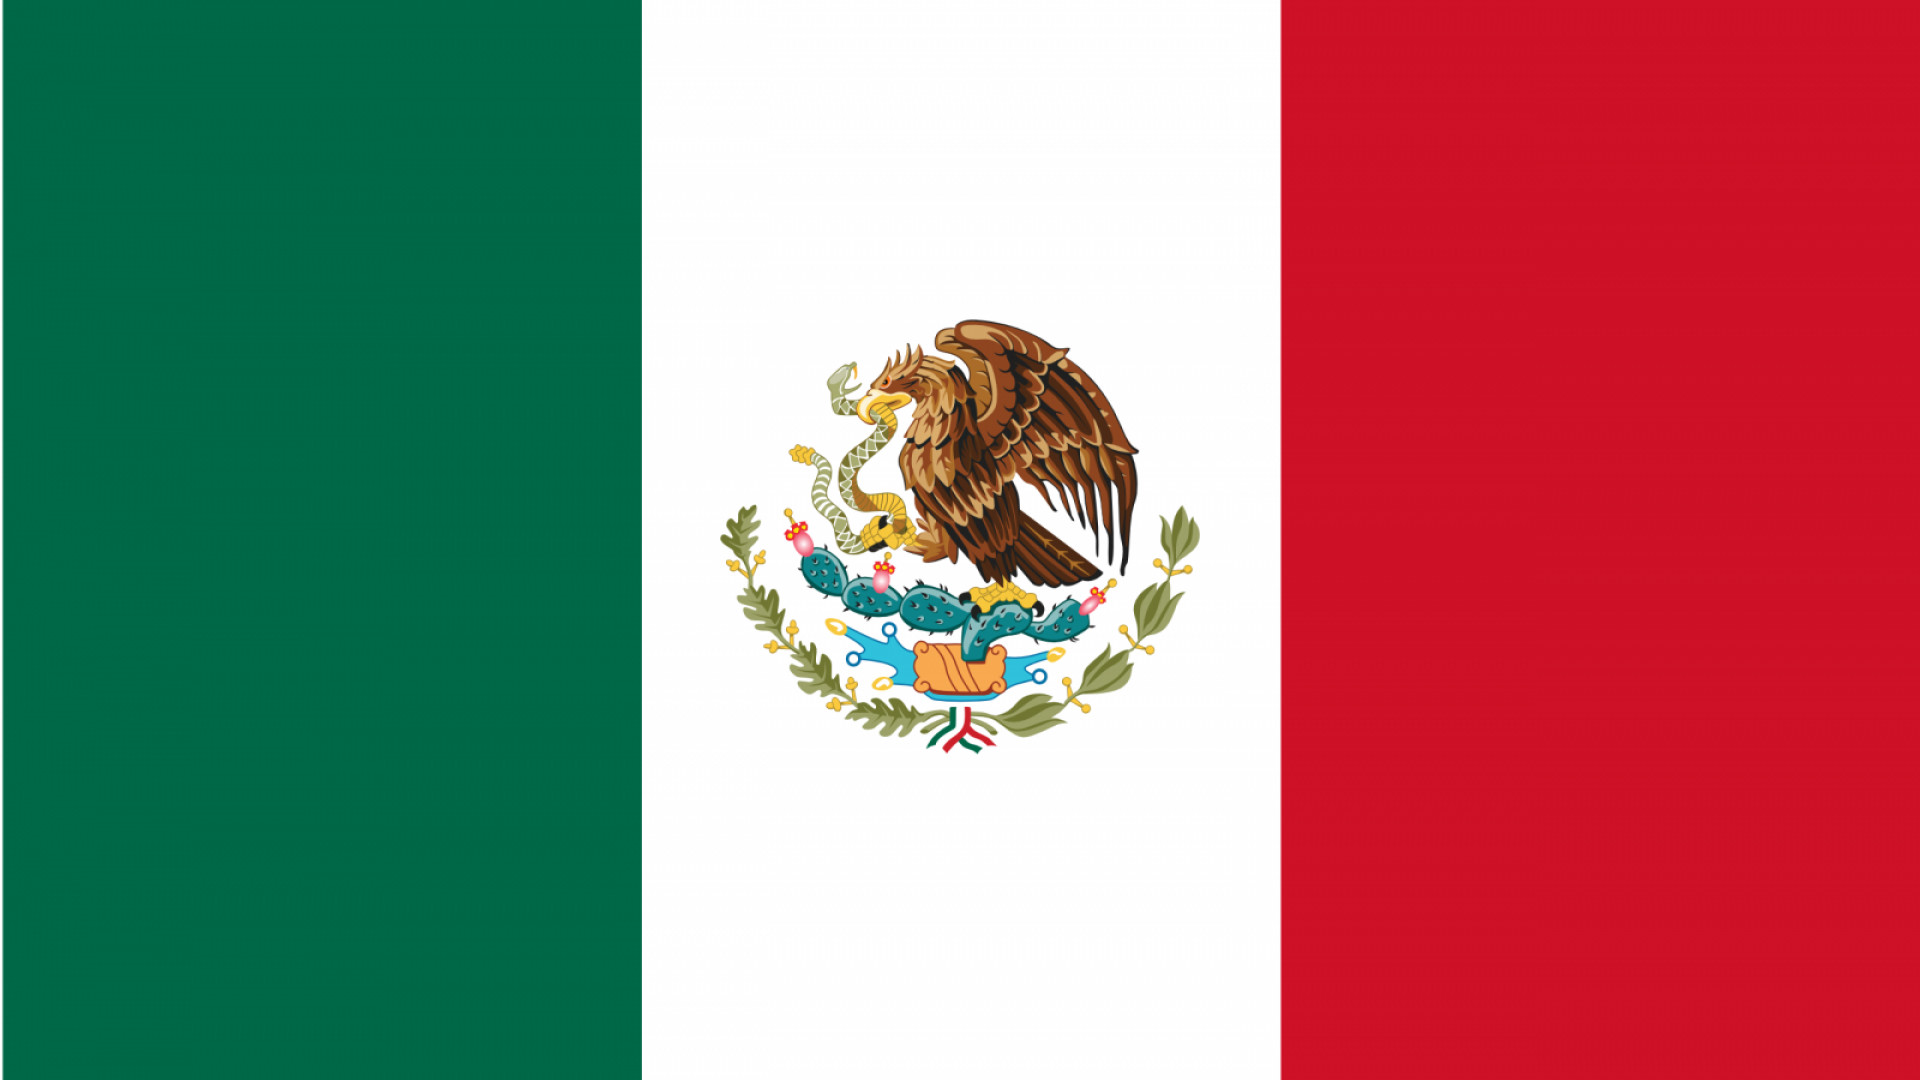 1920x1080 Mexico Flag Wallpaper | HD Wallpapers | Pinterest | Mexico flag and  Wallpaper